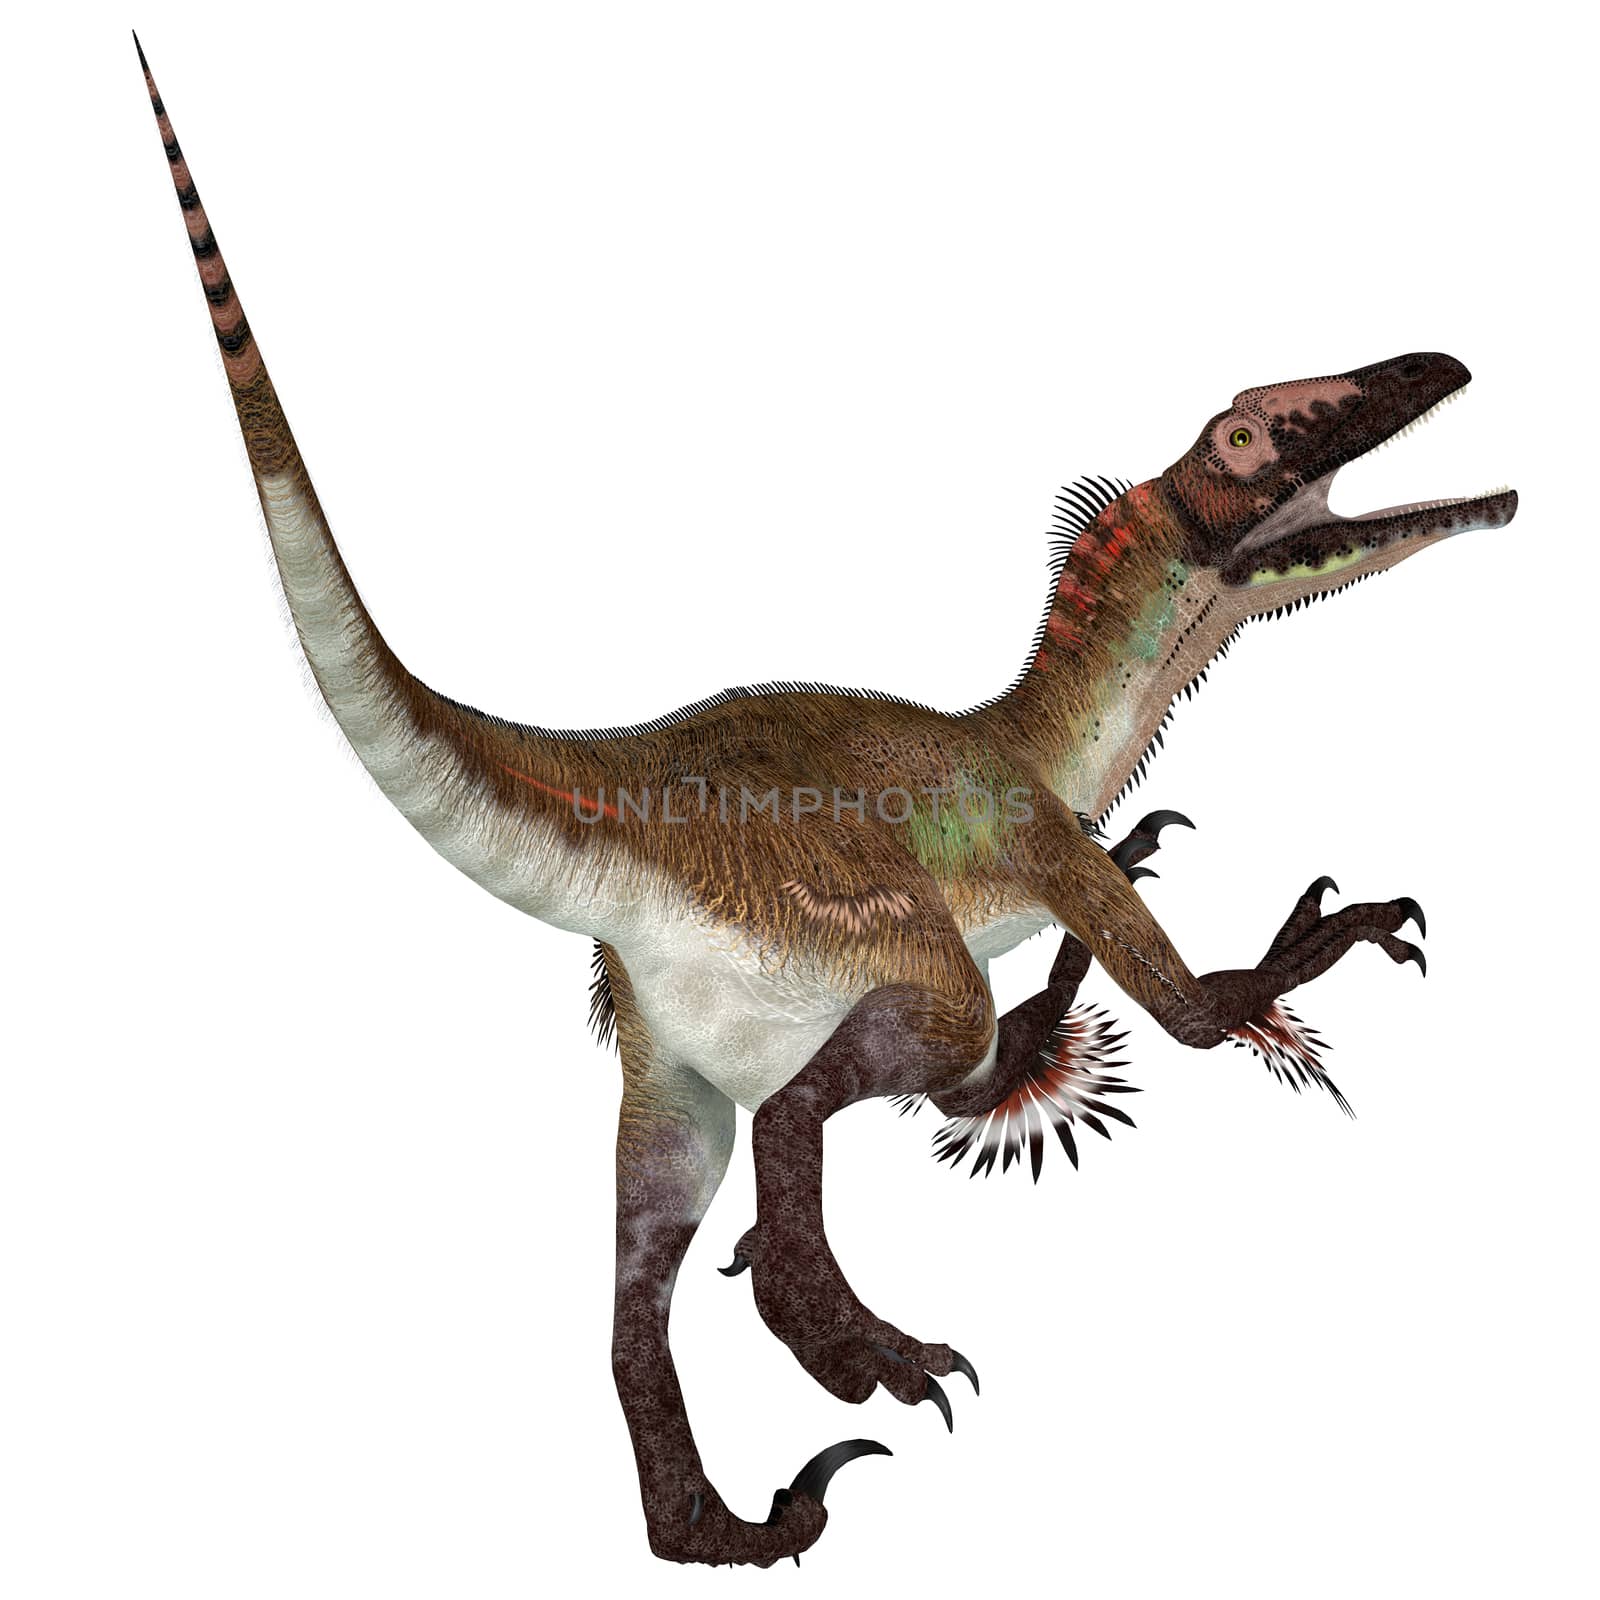 Utahraptor was a carnivorous theropod dinosaur that lived in Utah, United States during the Cretaceous Period.